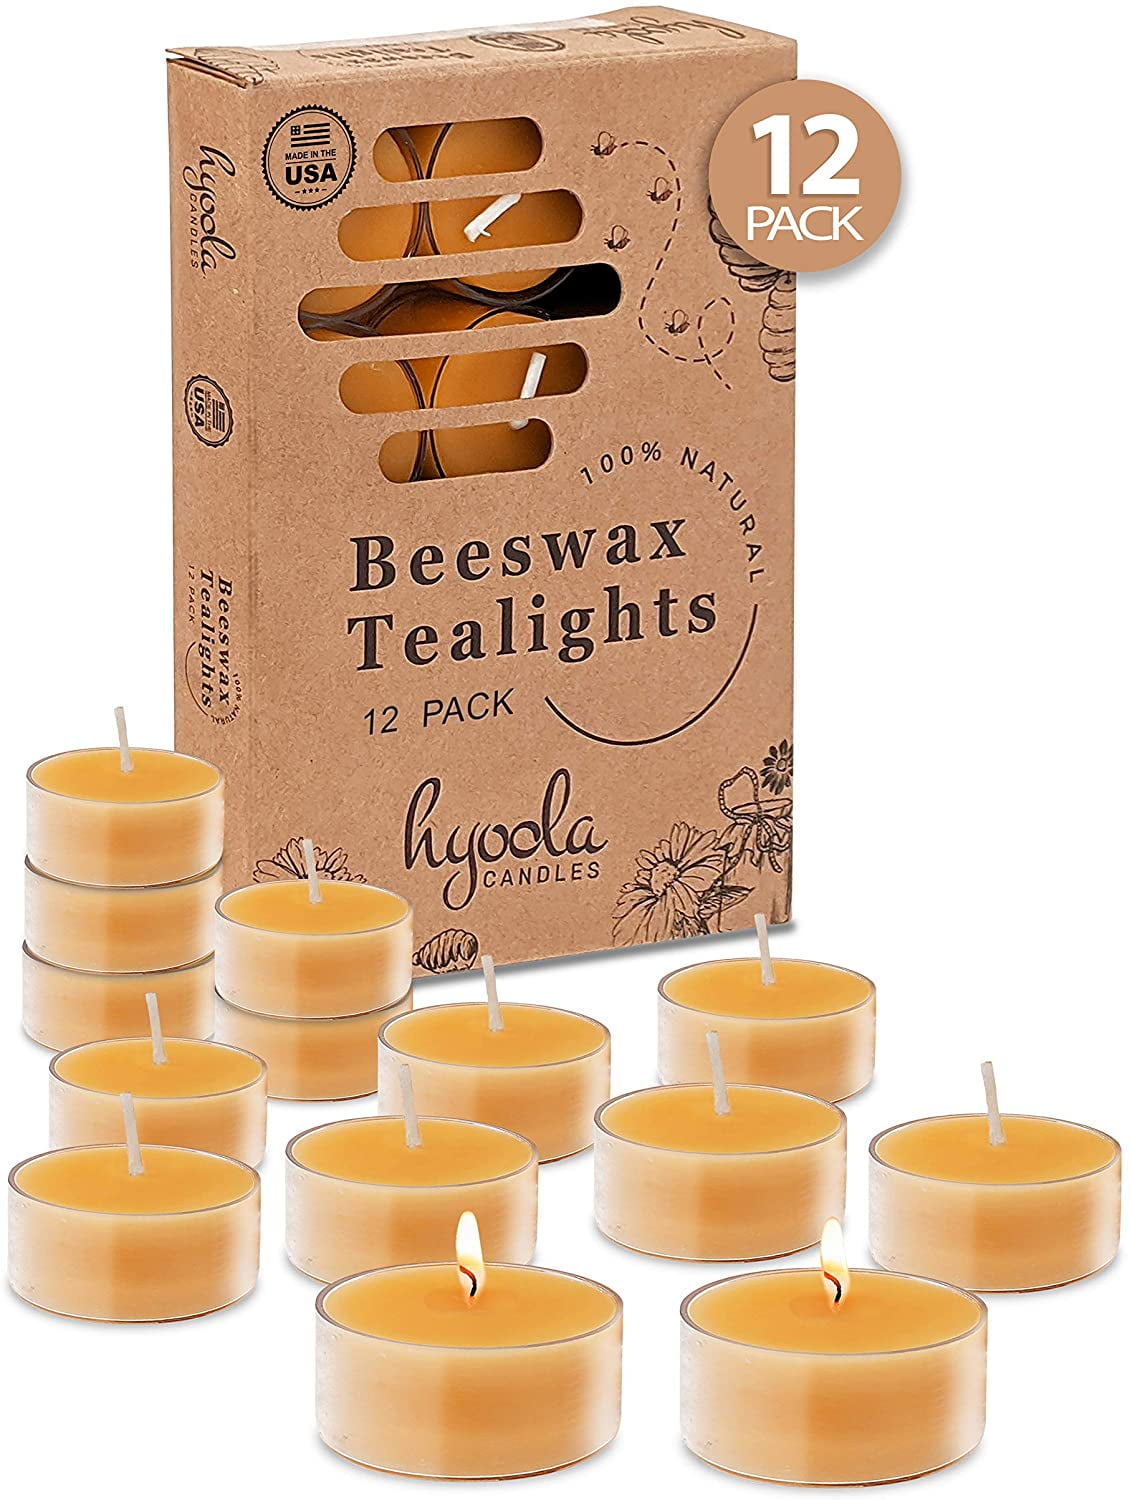 6 Natural Honey Scented Beeswax Tea Light Candles Cotton Wick Aluminum Cup